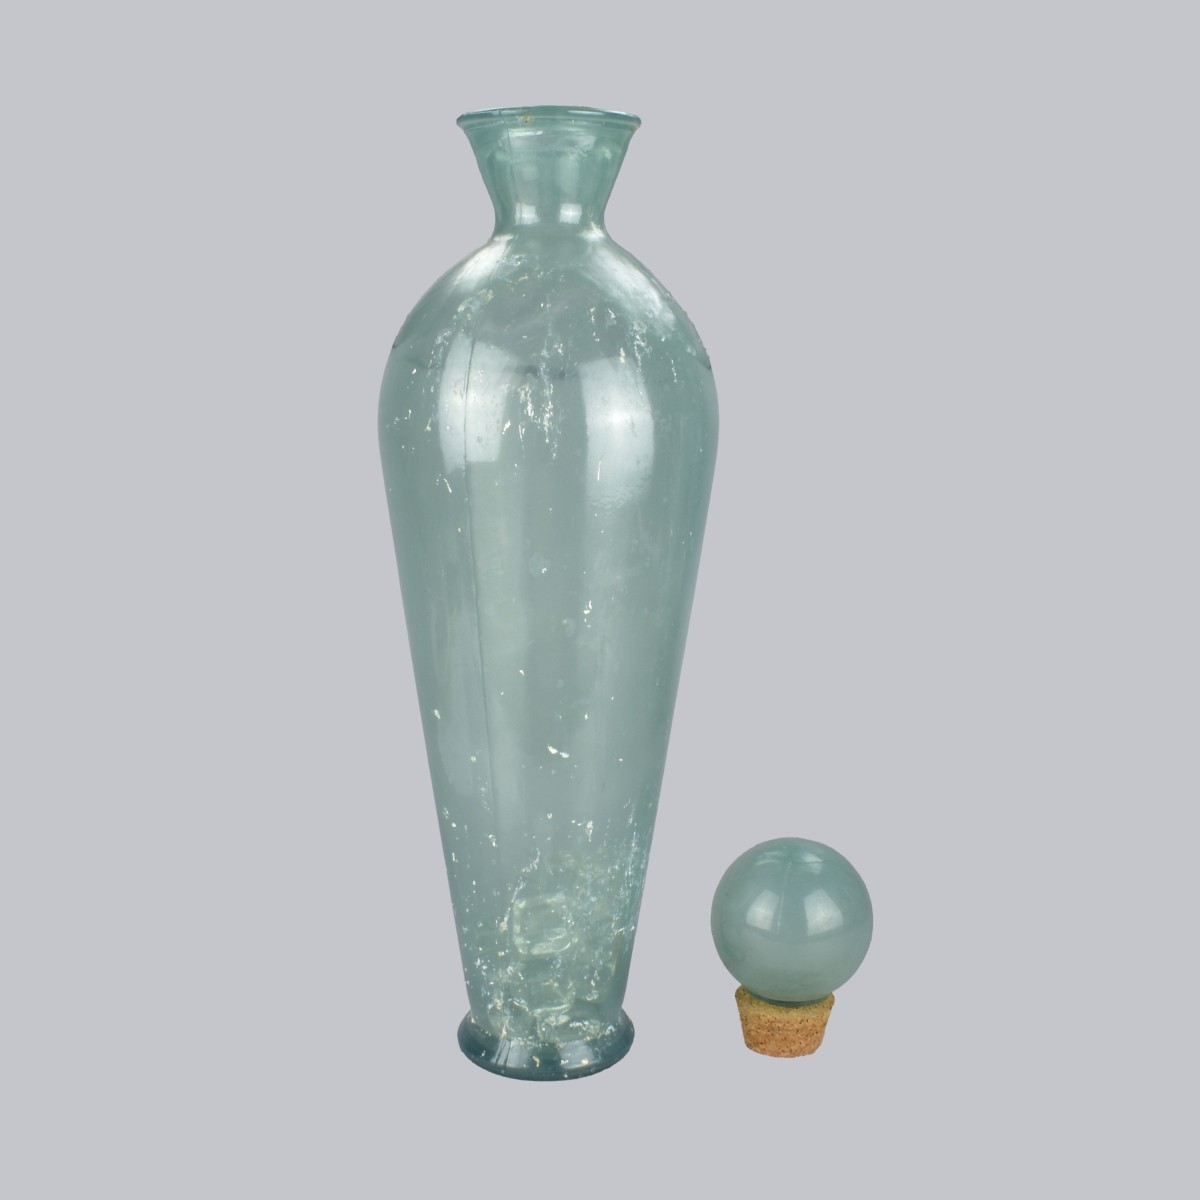 Pair of Large Modern Decanters